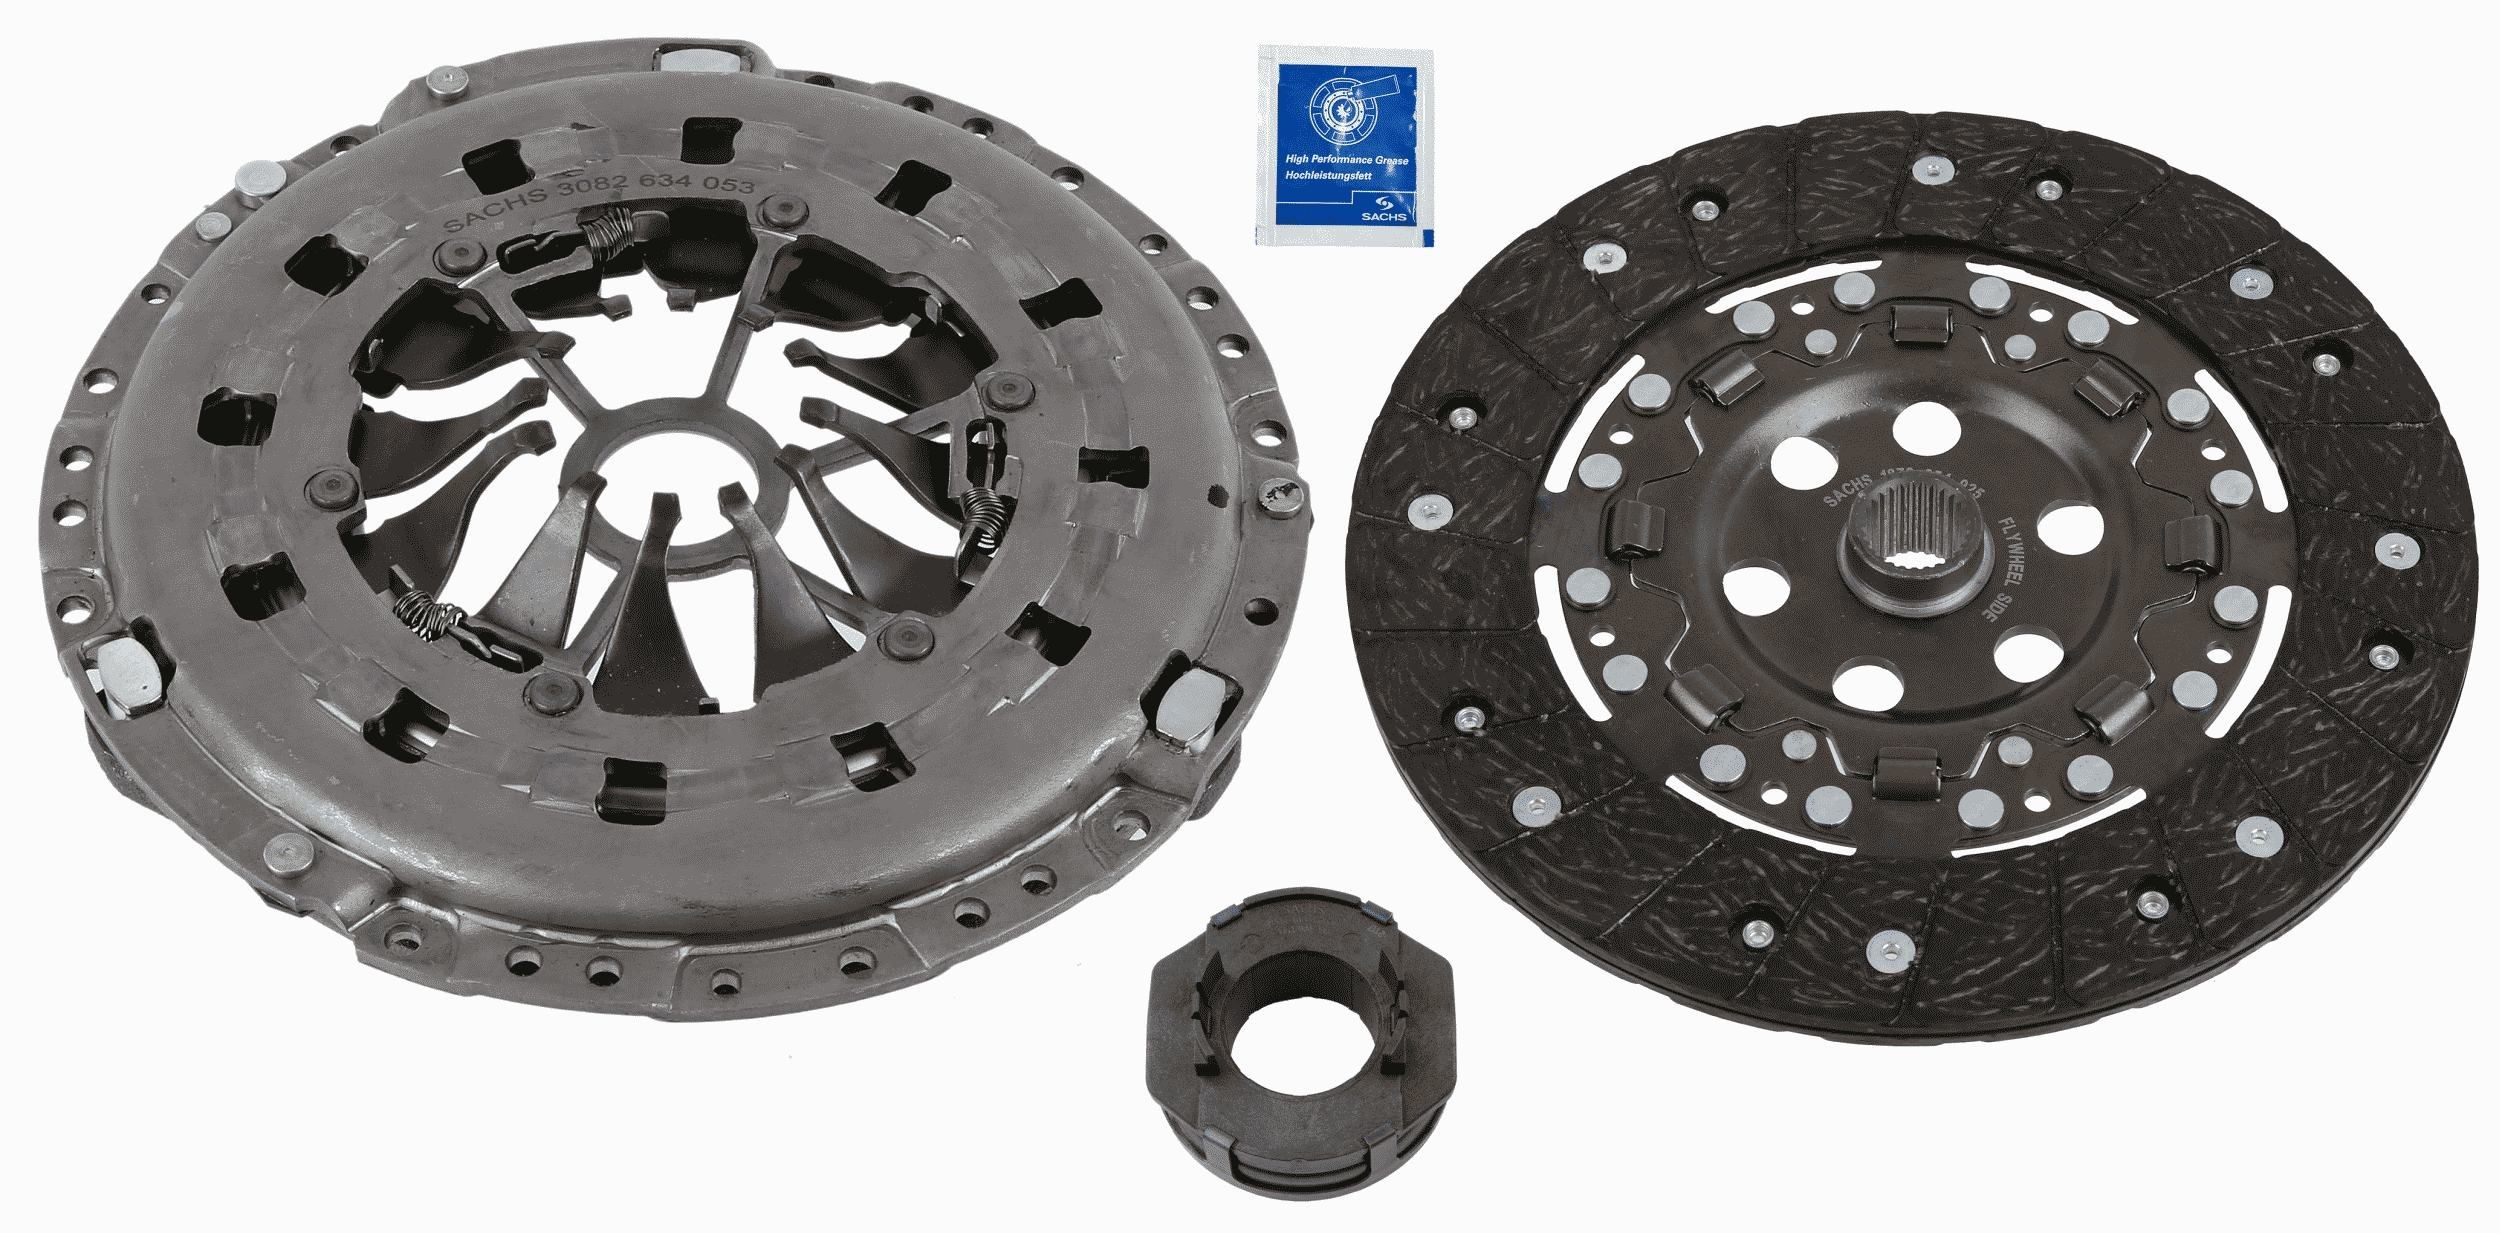 SACHS Clutch replacement kit Seat Leon 5f8 new 3000 951 635